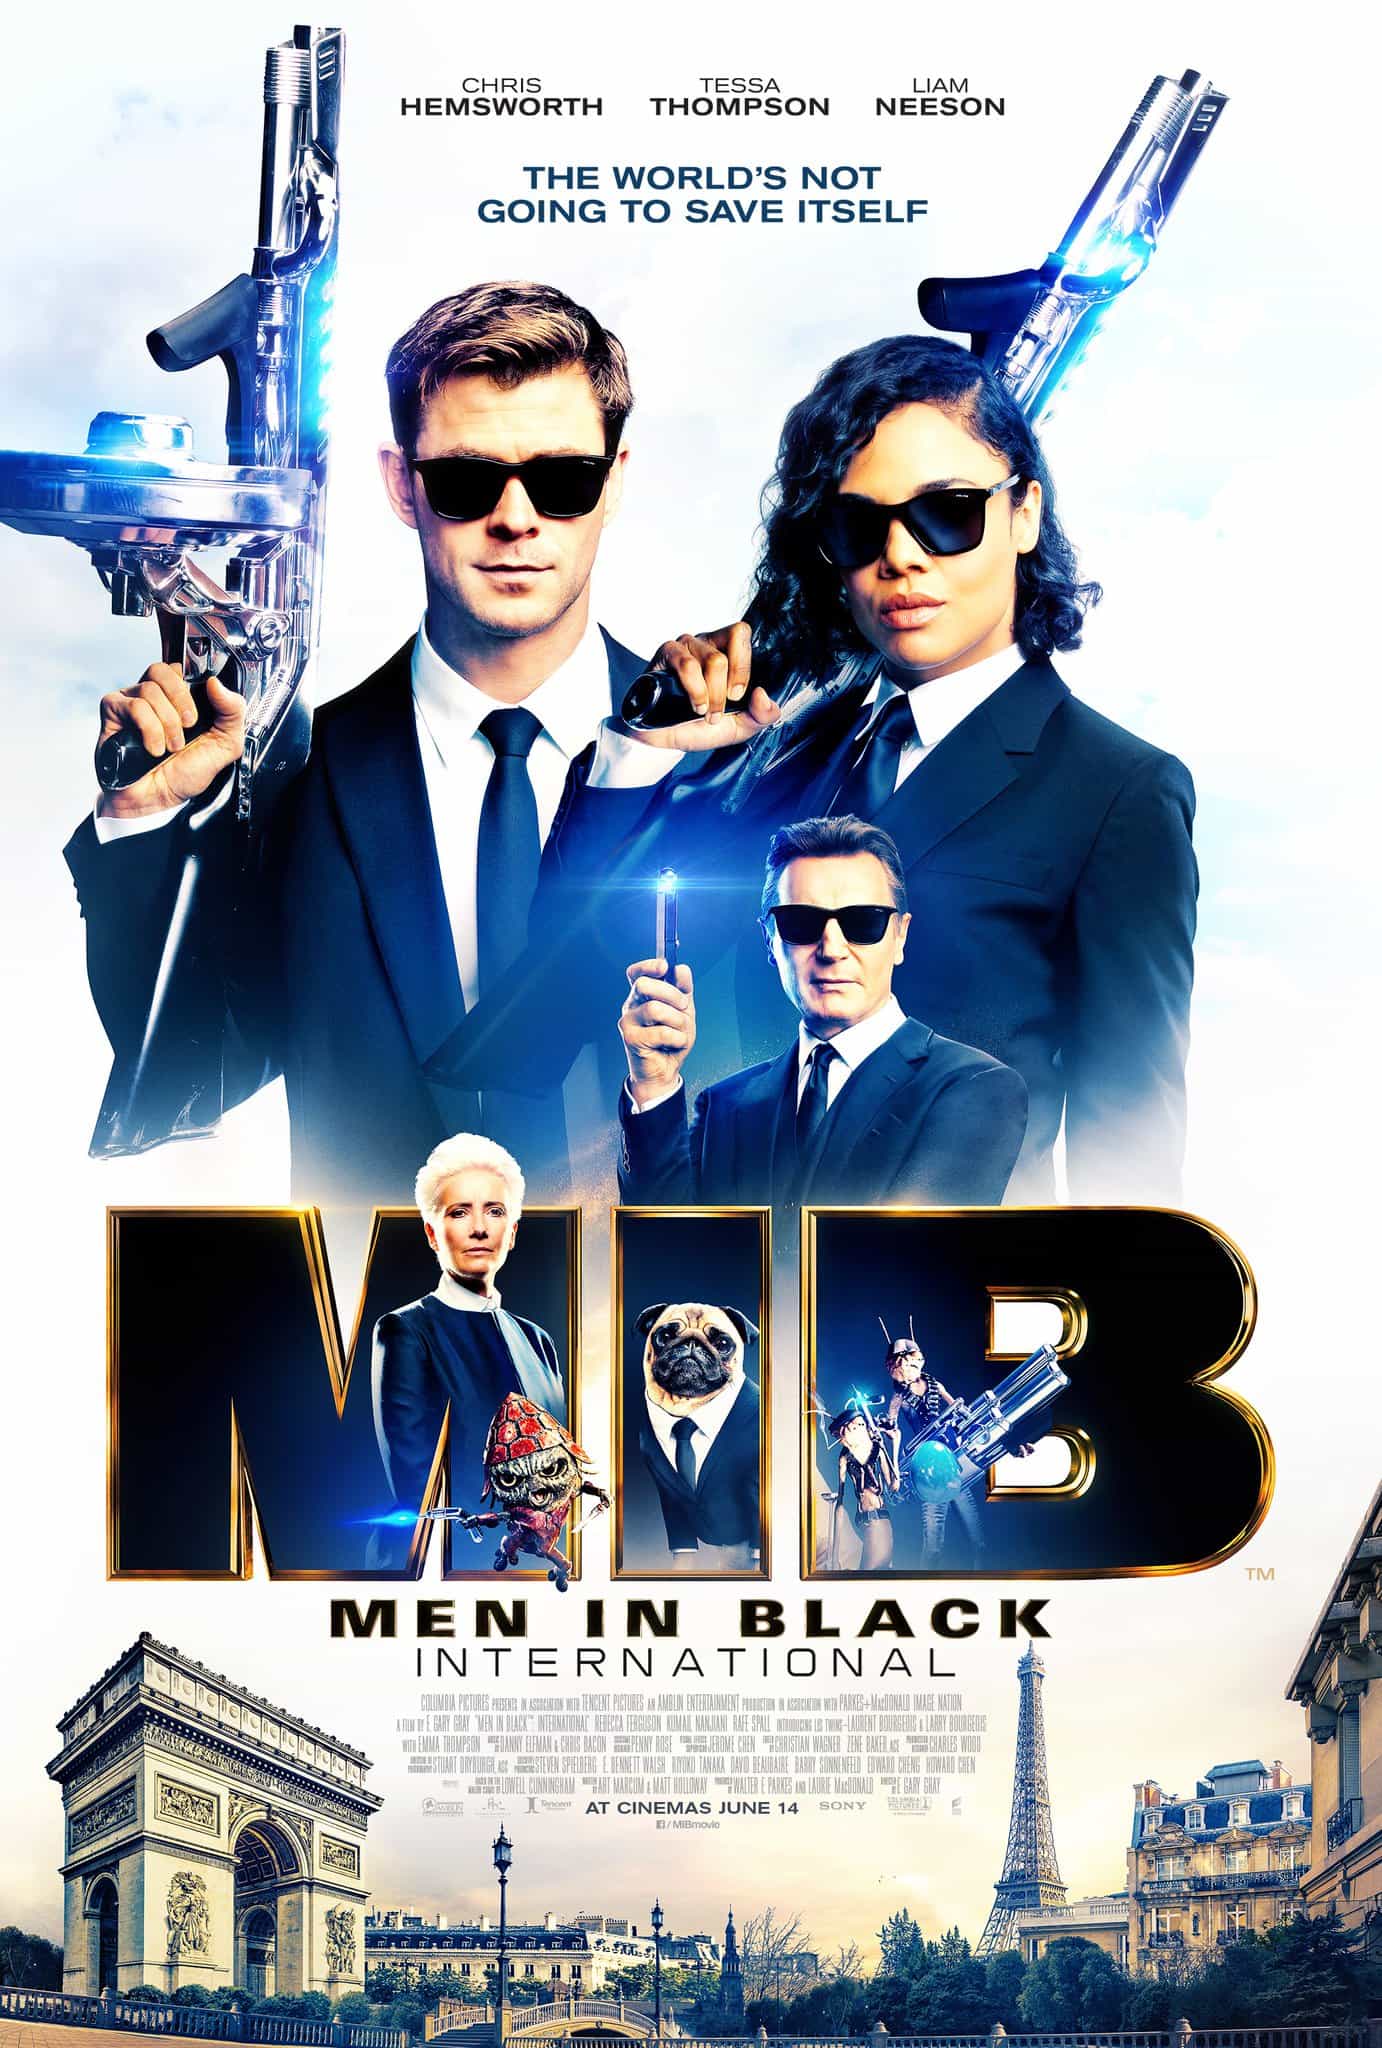 World Box Office Analysis 14th - 16th June 2019:  Men In Black International hit the top globally on its debut weekend